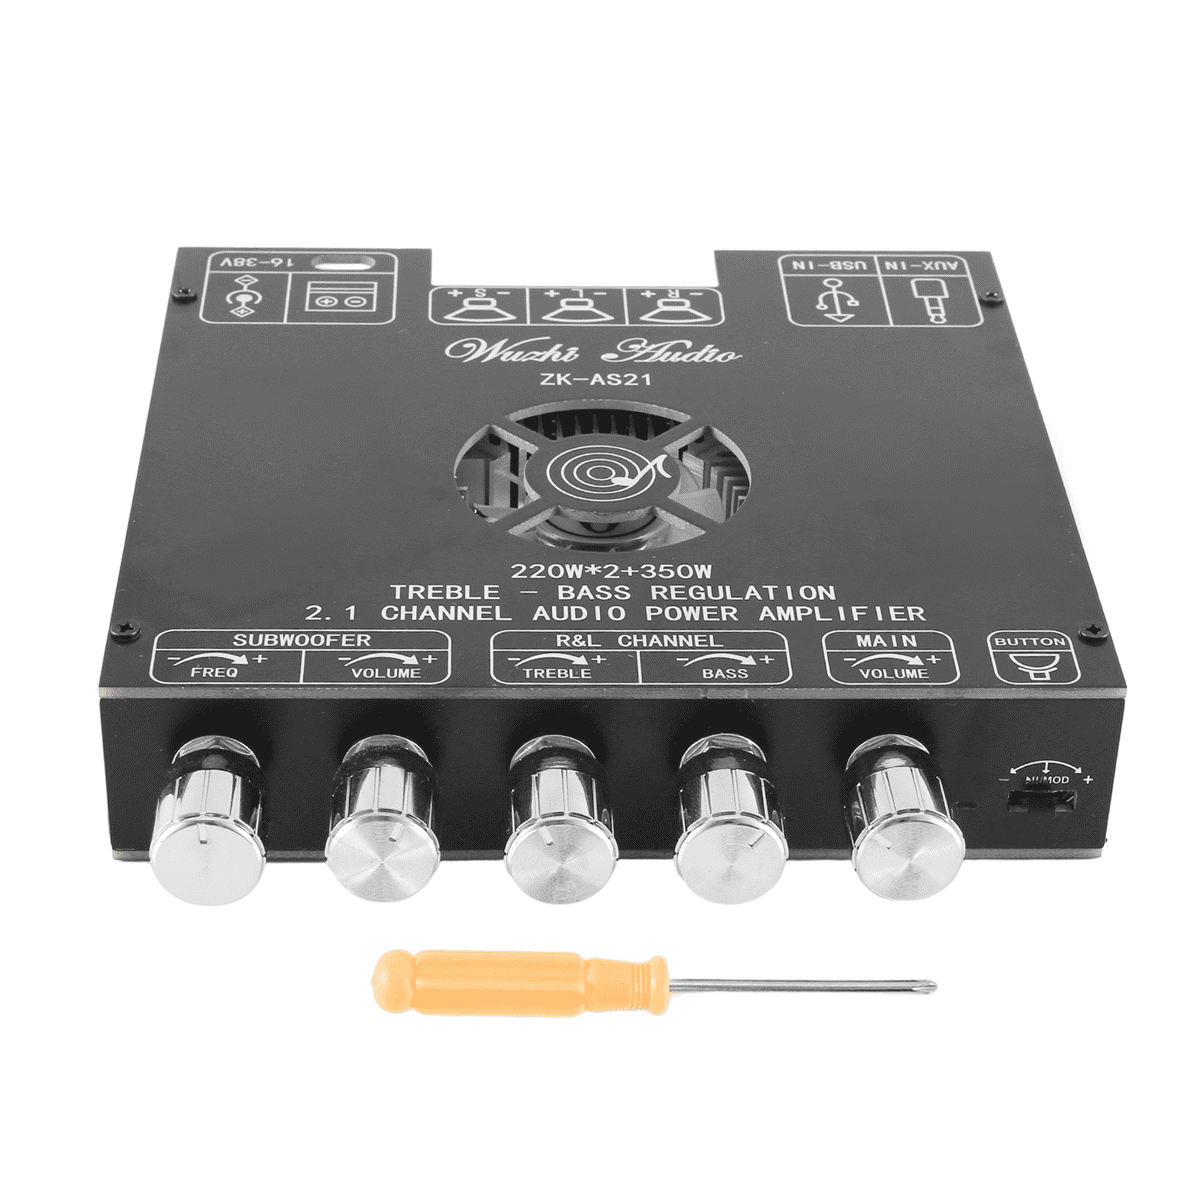 Automatic DVB-T2 Antenna Amplifier / integr. DOCK Switch only 182,95 €